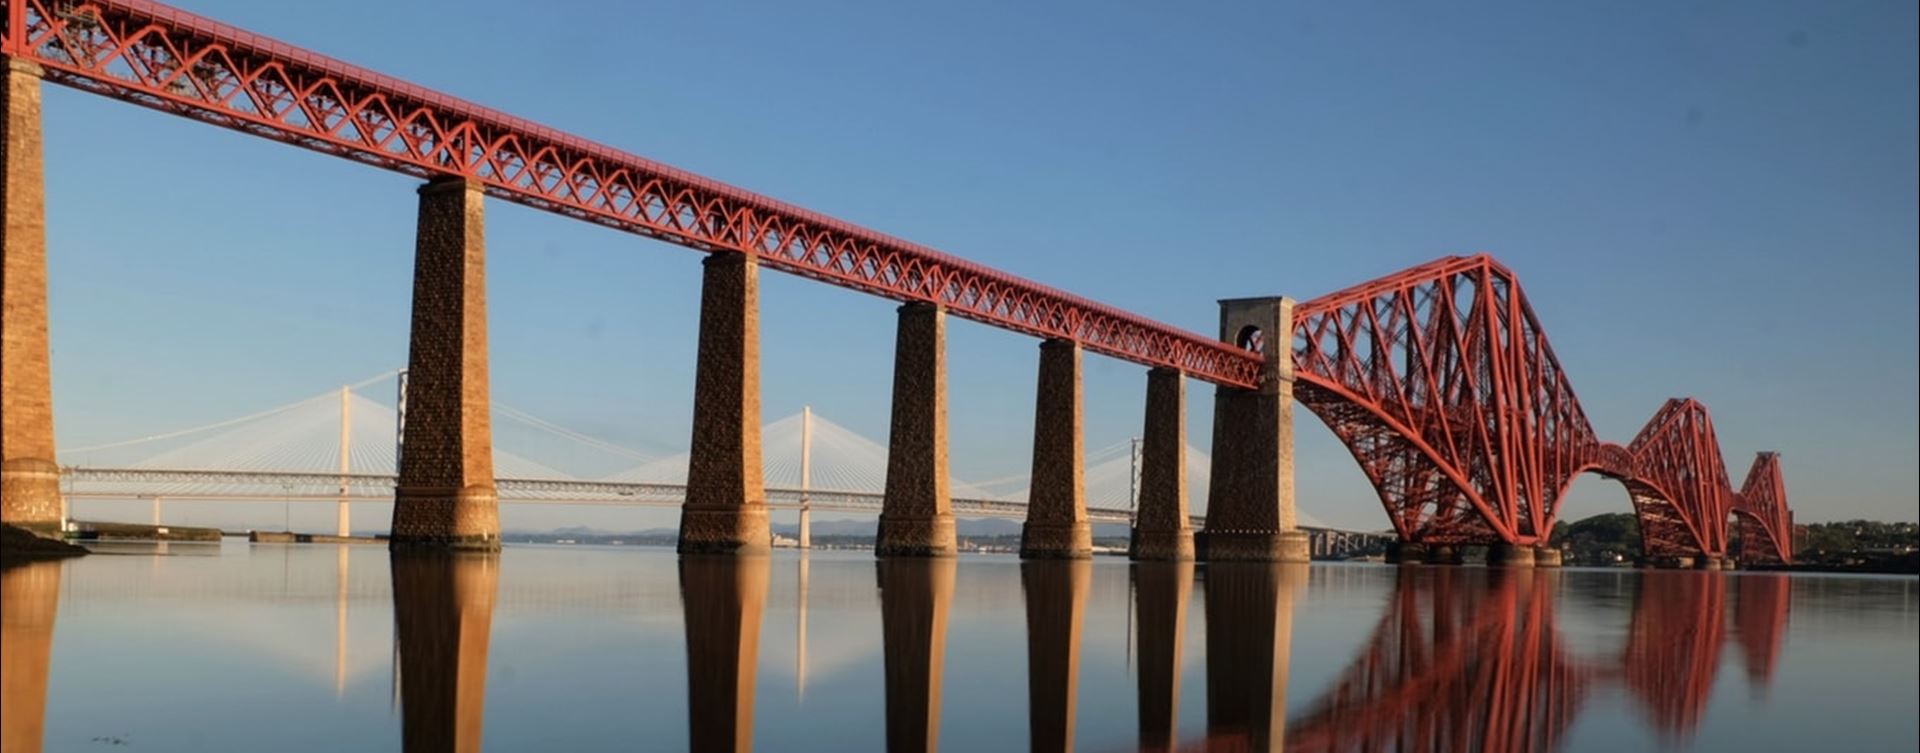 A photo of the Forth Rail Bridge on a clear day